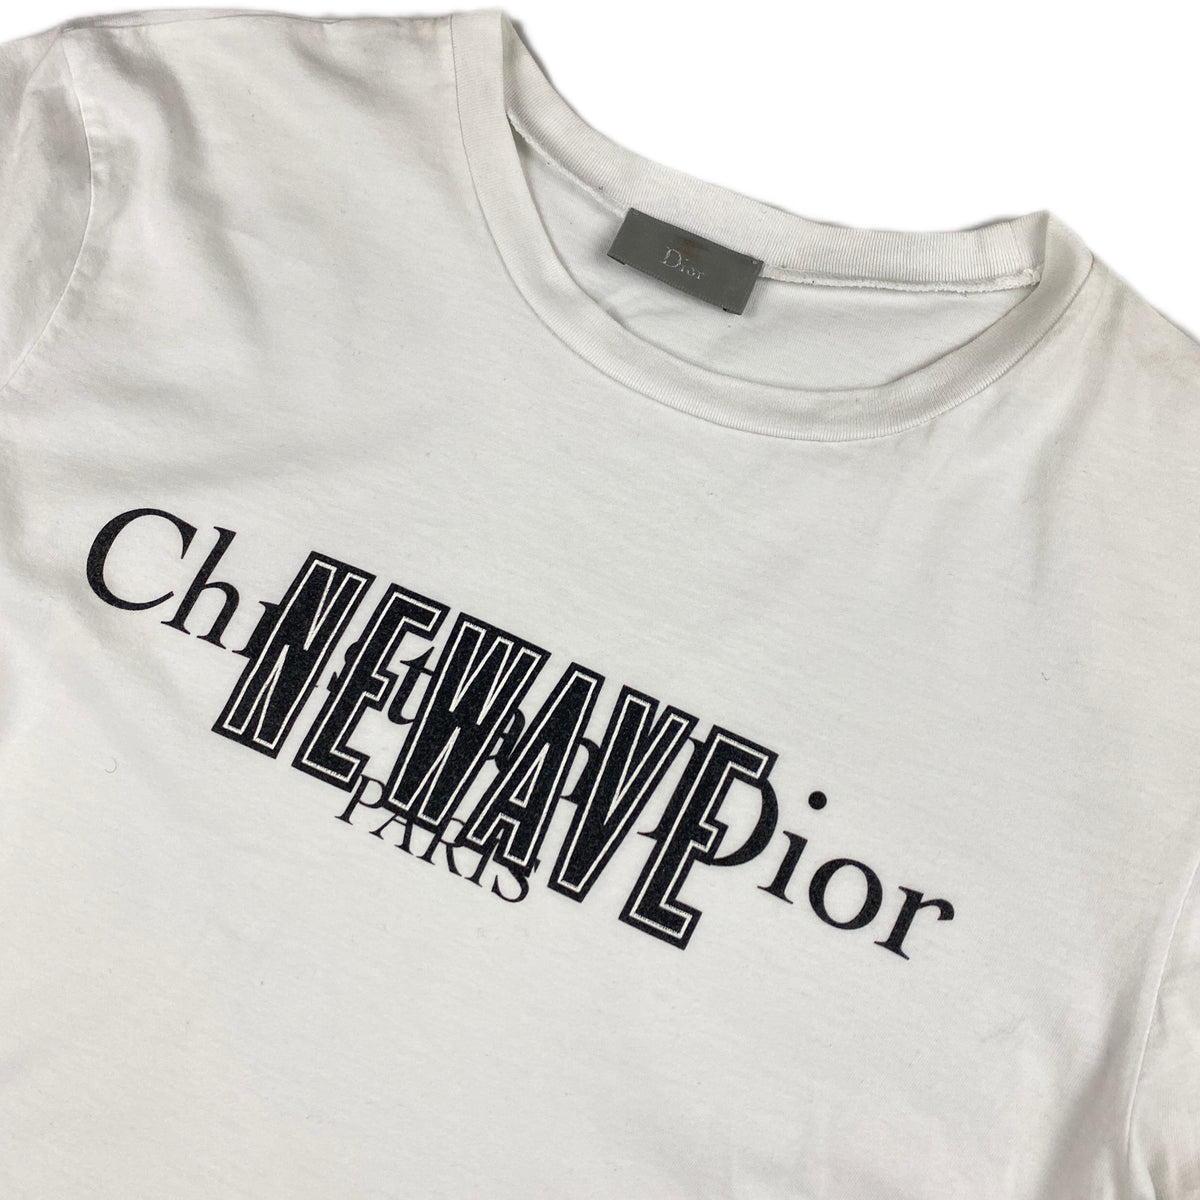 CHRISTIAN DIOR NEW WAVE TEE (S) | Thrifty Towel